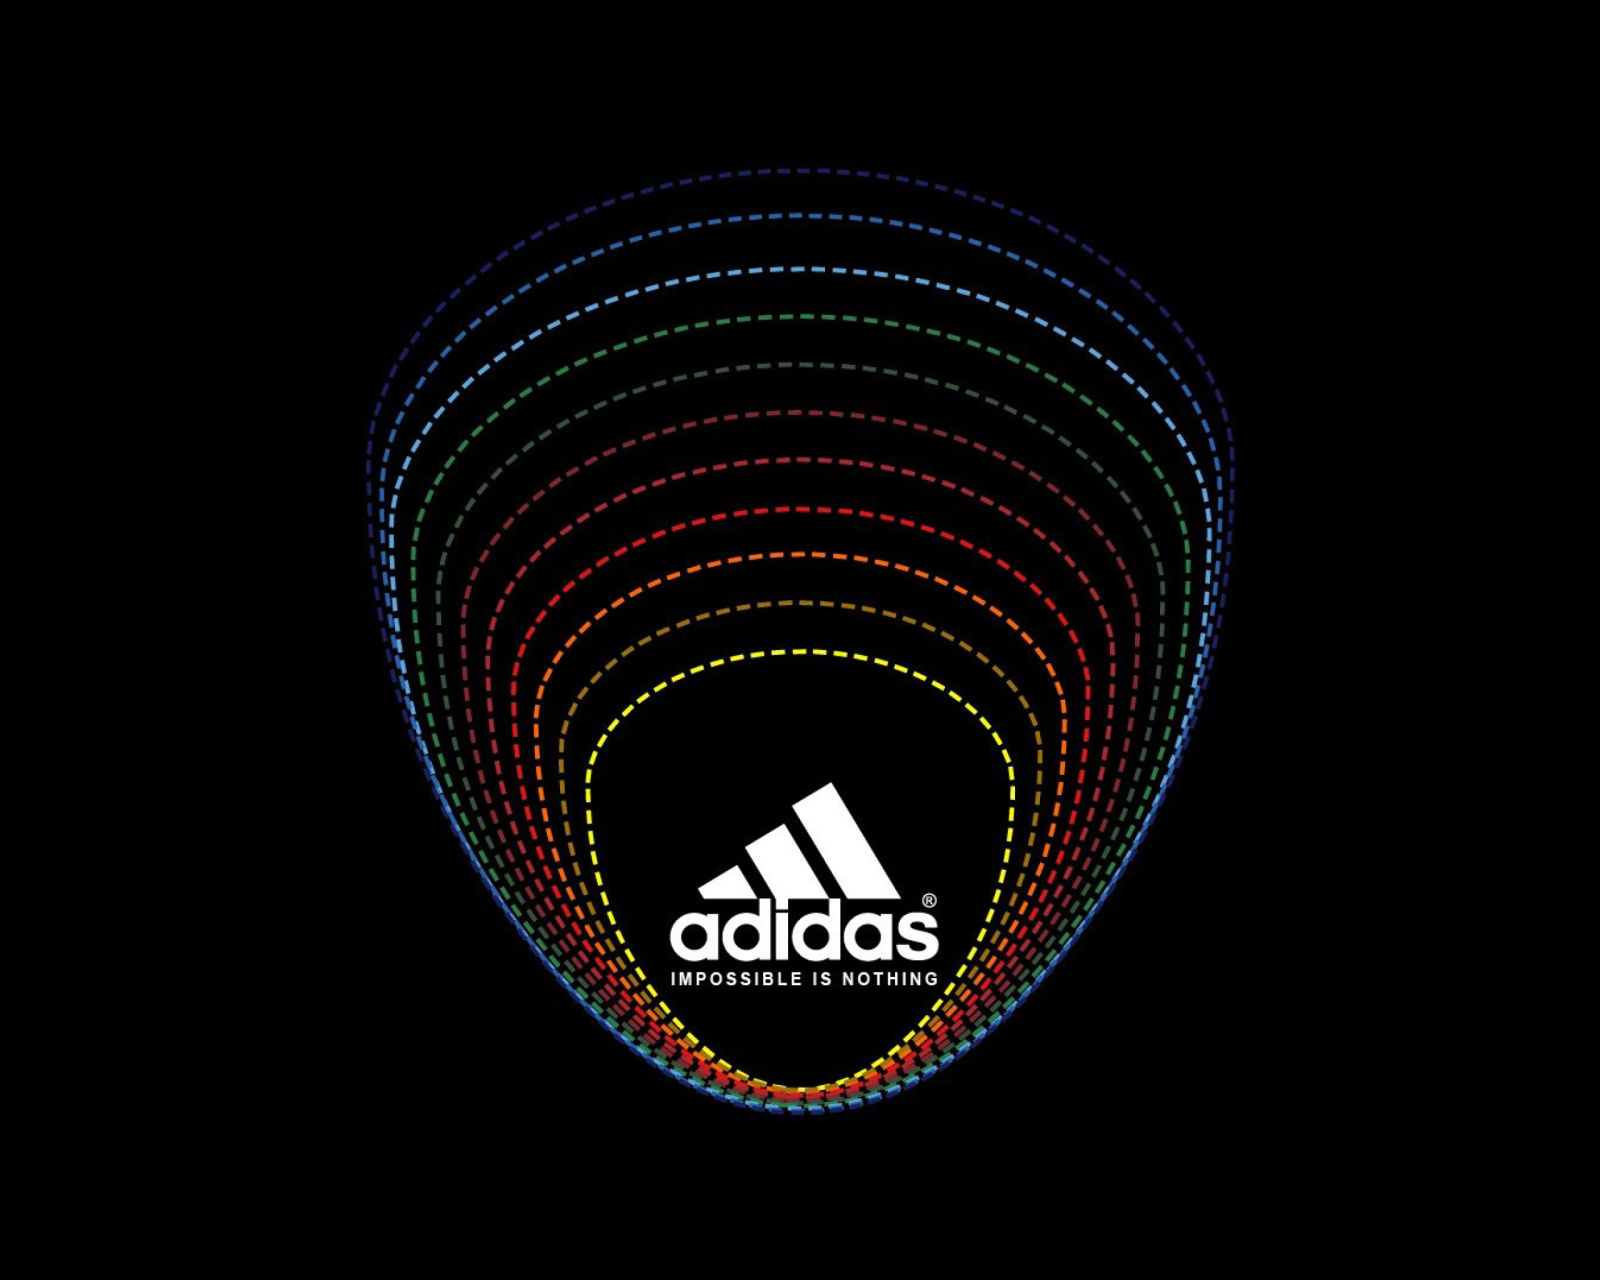 Adidas Tagline, Impossible is Nothing wallpaper 1600x1280